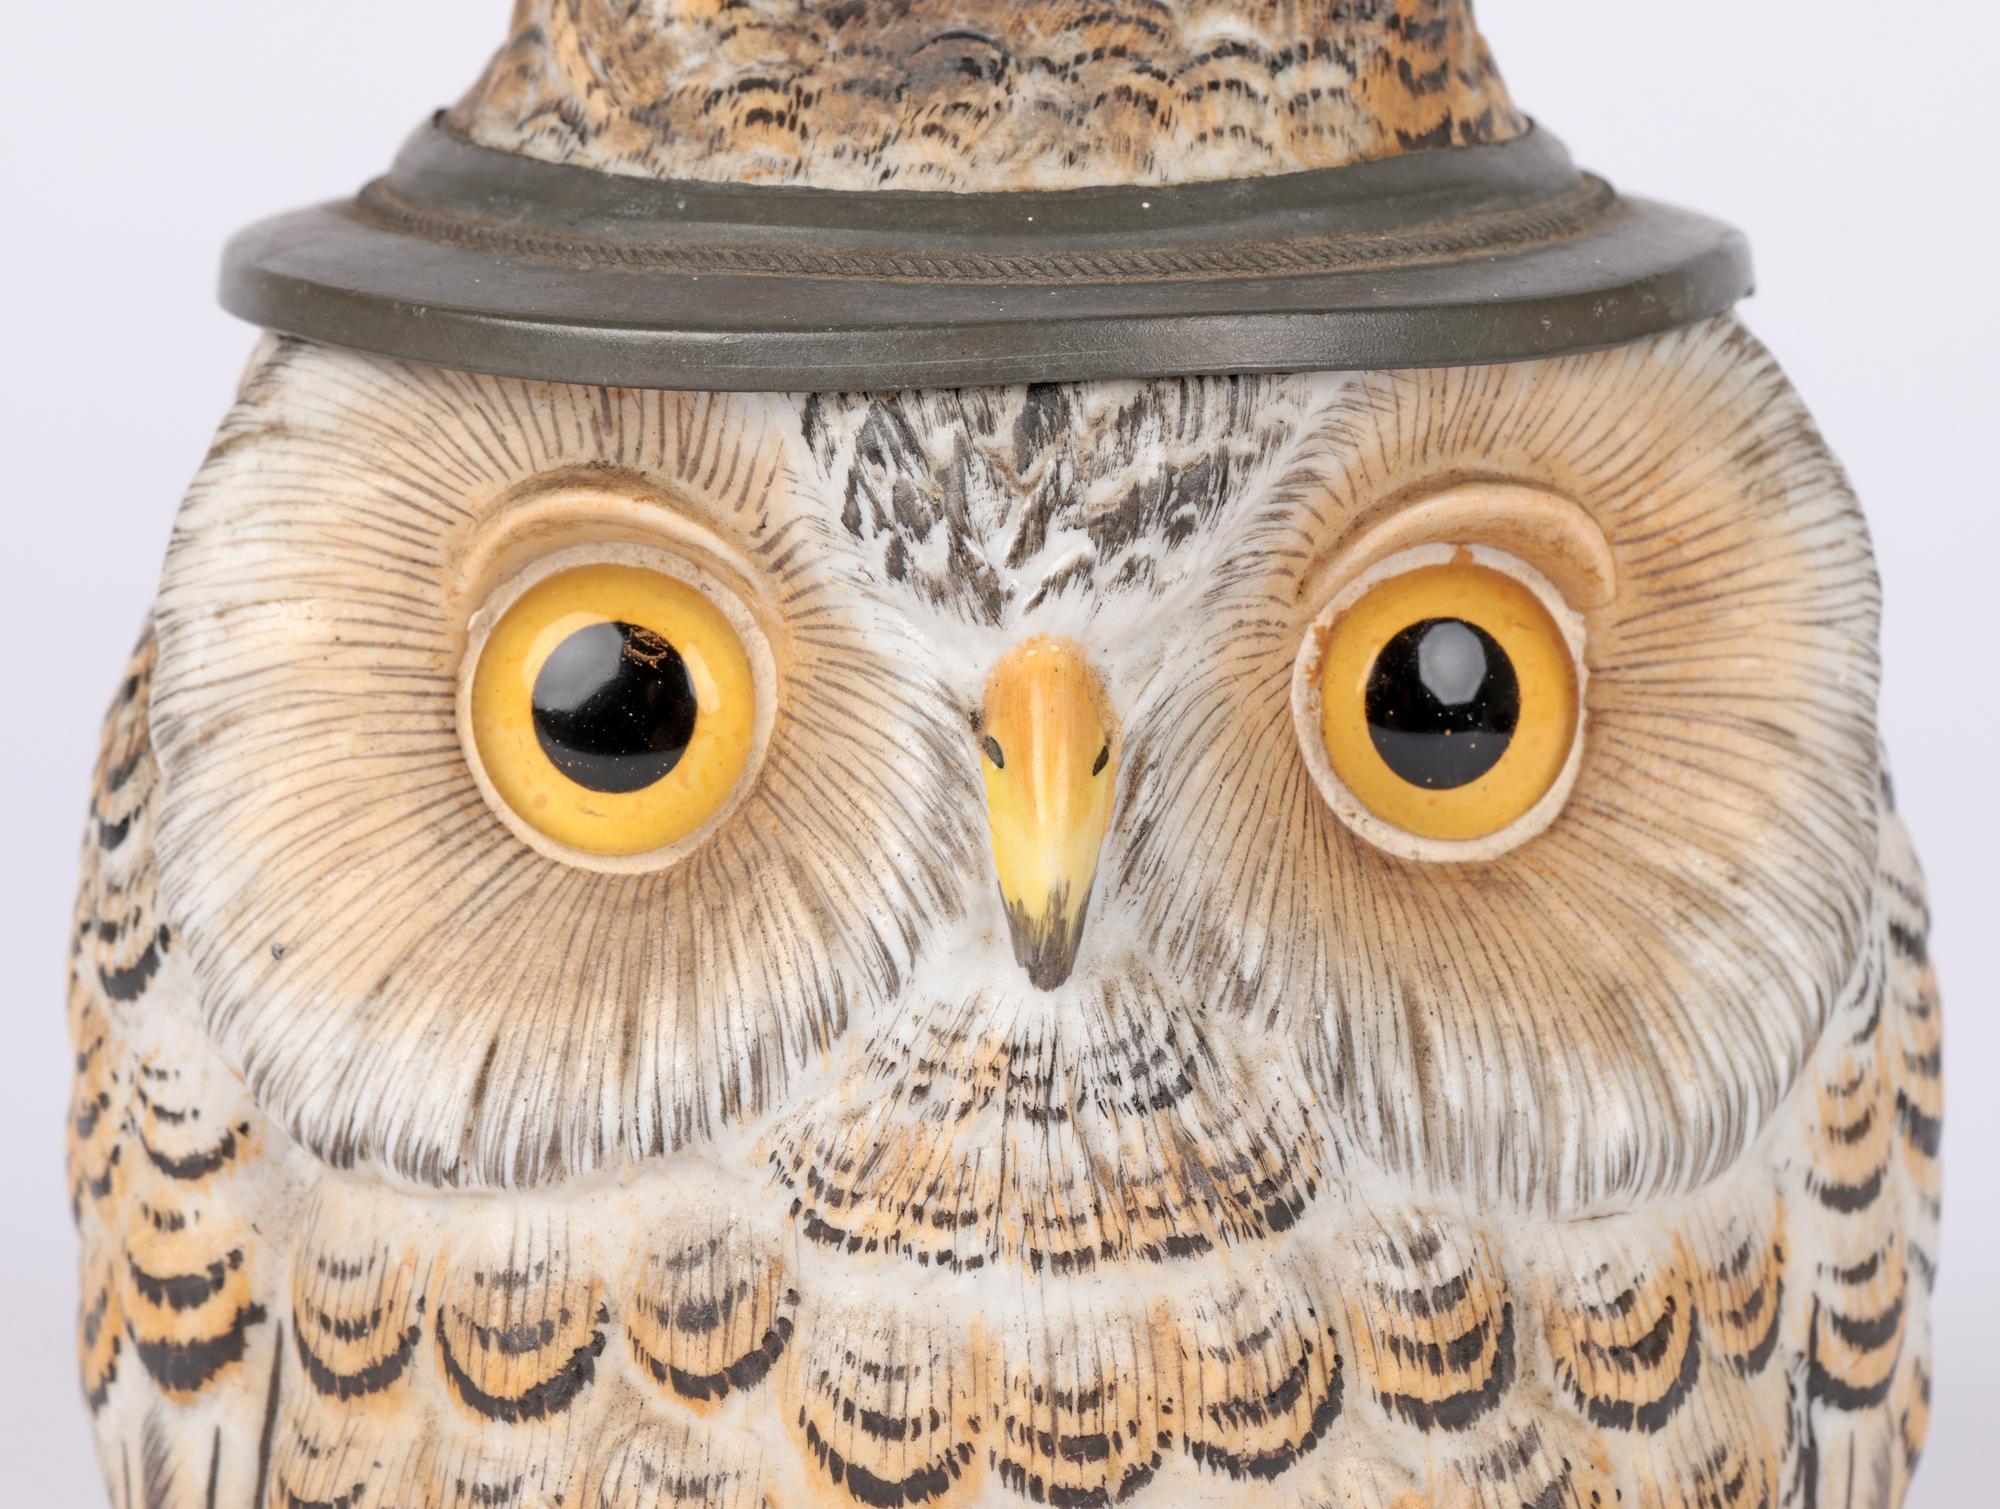 An exceptional antique German attributed porcelain beer stein modelled as an owl and dating from the latter 19th century. The stein is of rounded bulbous shape with a large twig styled handle with oak leaf terminals and with a pewter mounted hinged